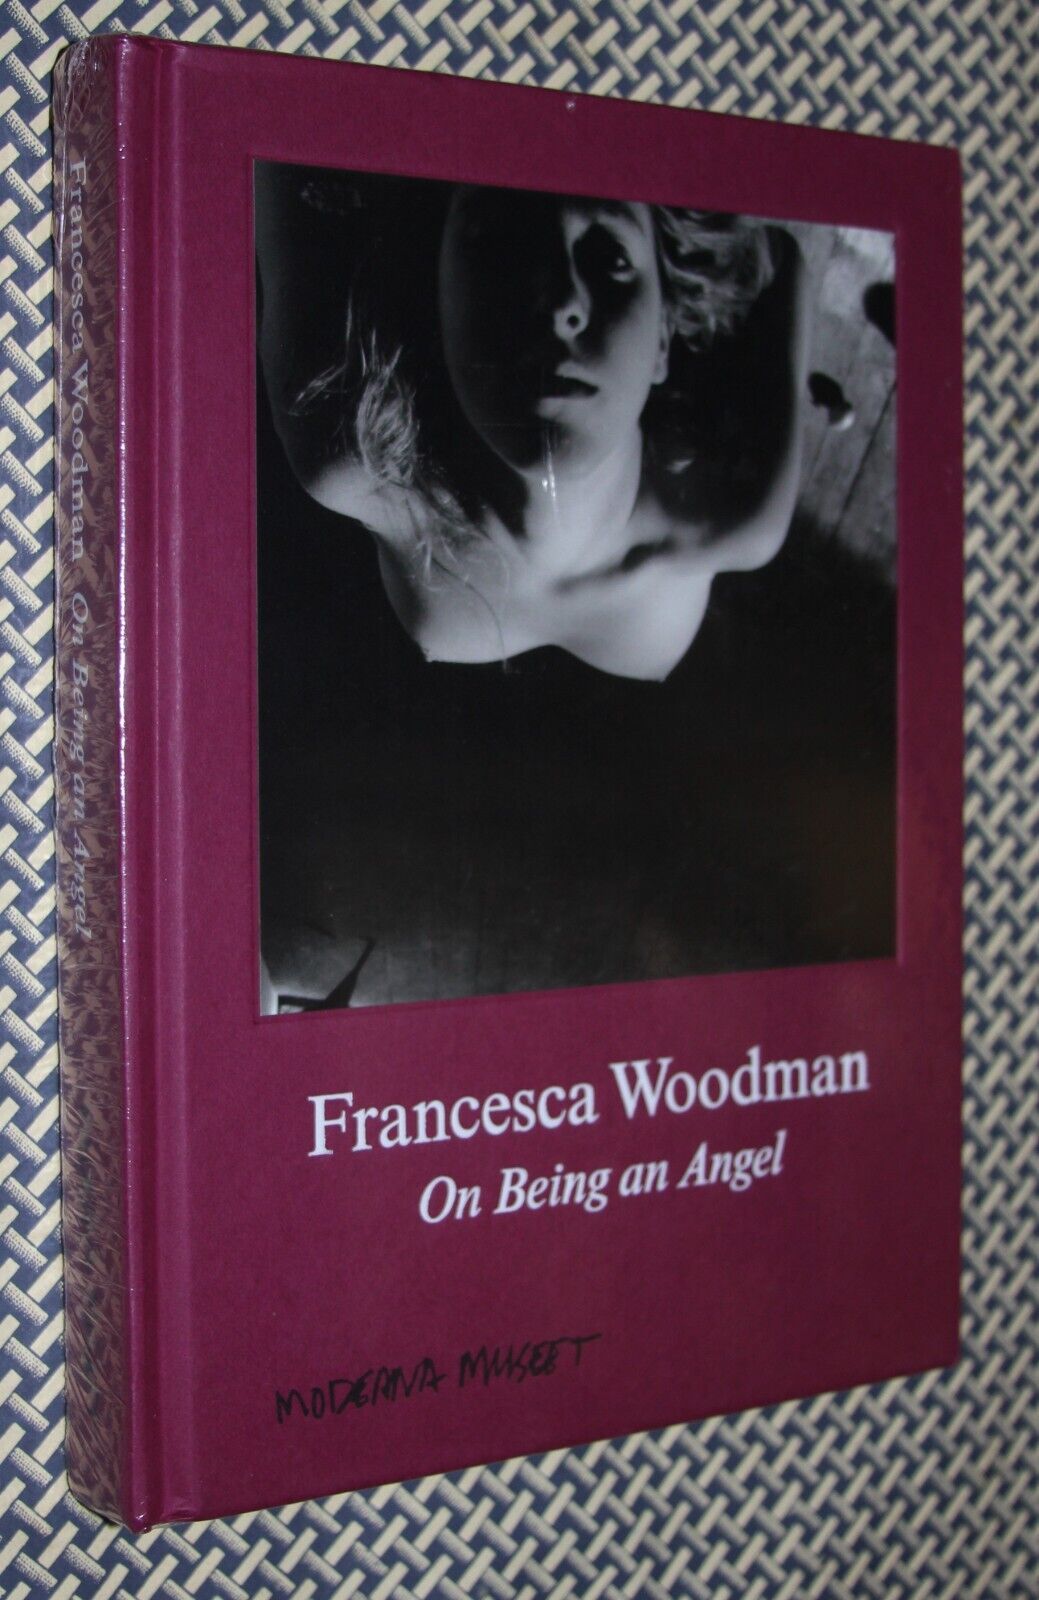 caro yepes recommends Best Of Woodman